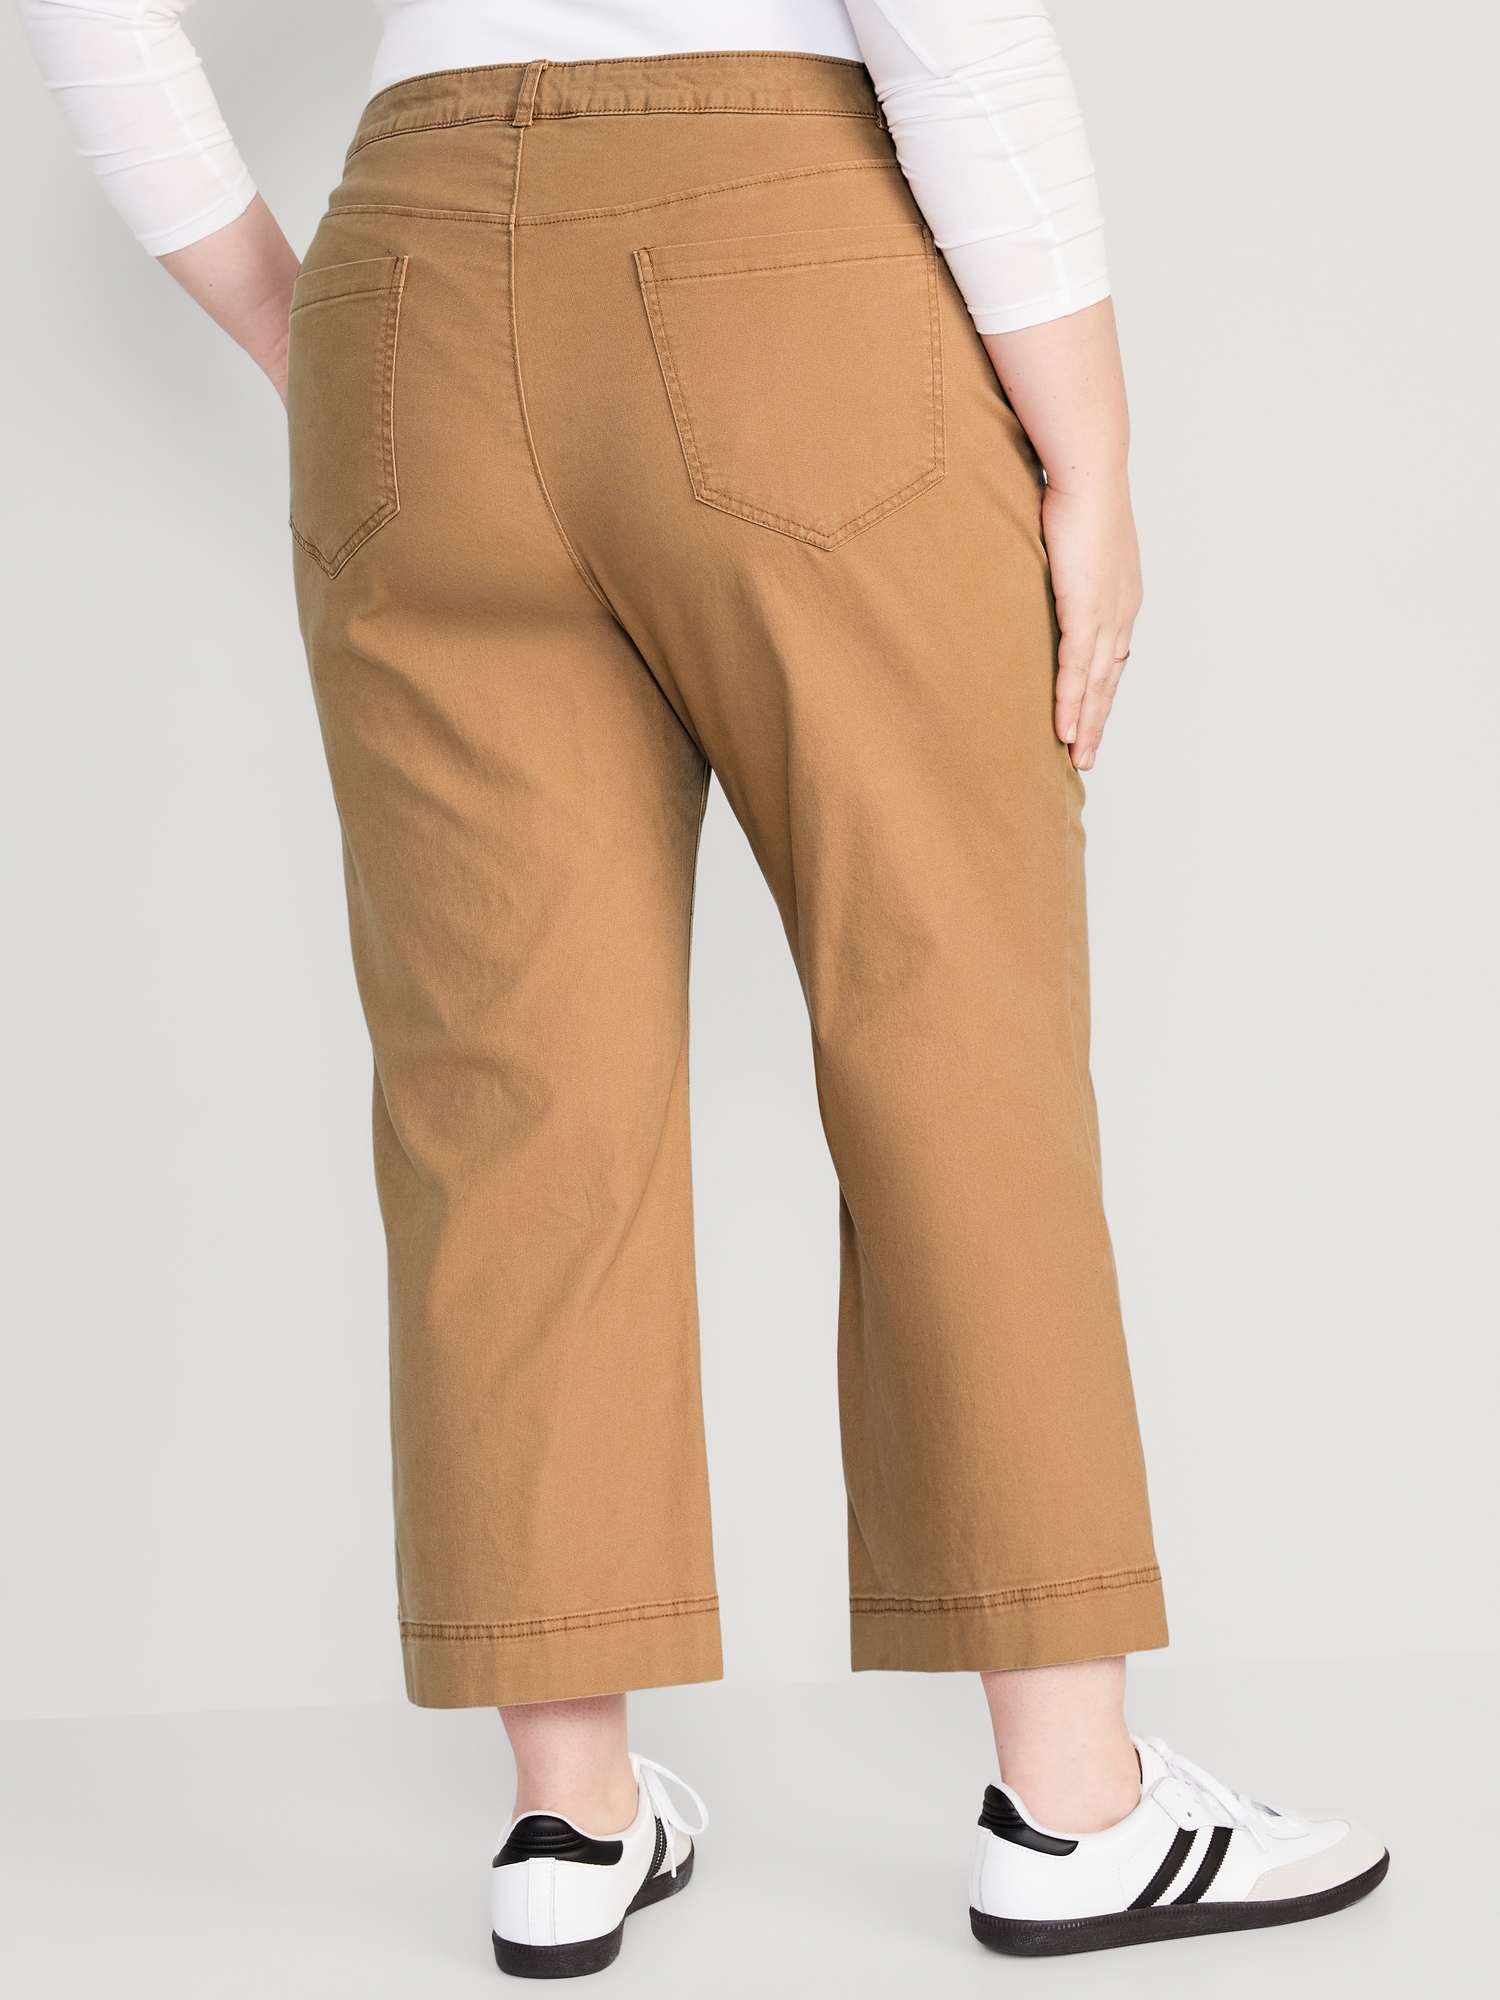 Materialisme Inhibere efterklang High-Waisted Cropped Wide-Leg Chino Pants for Women | Old Navy